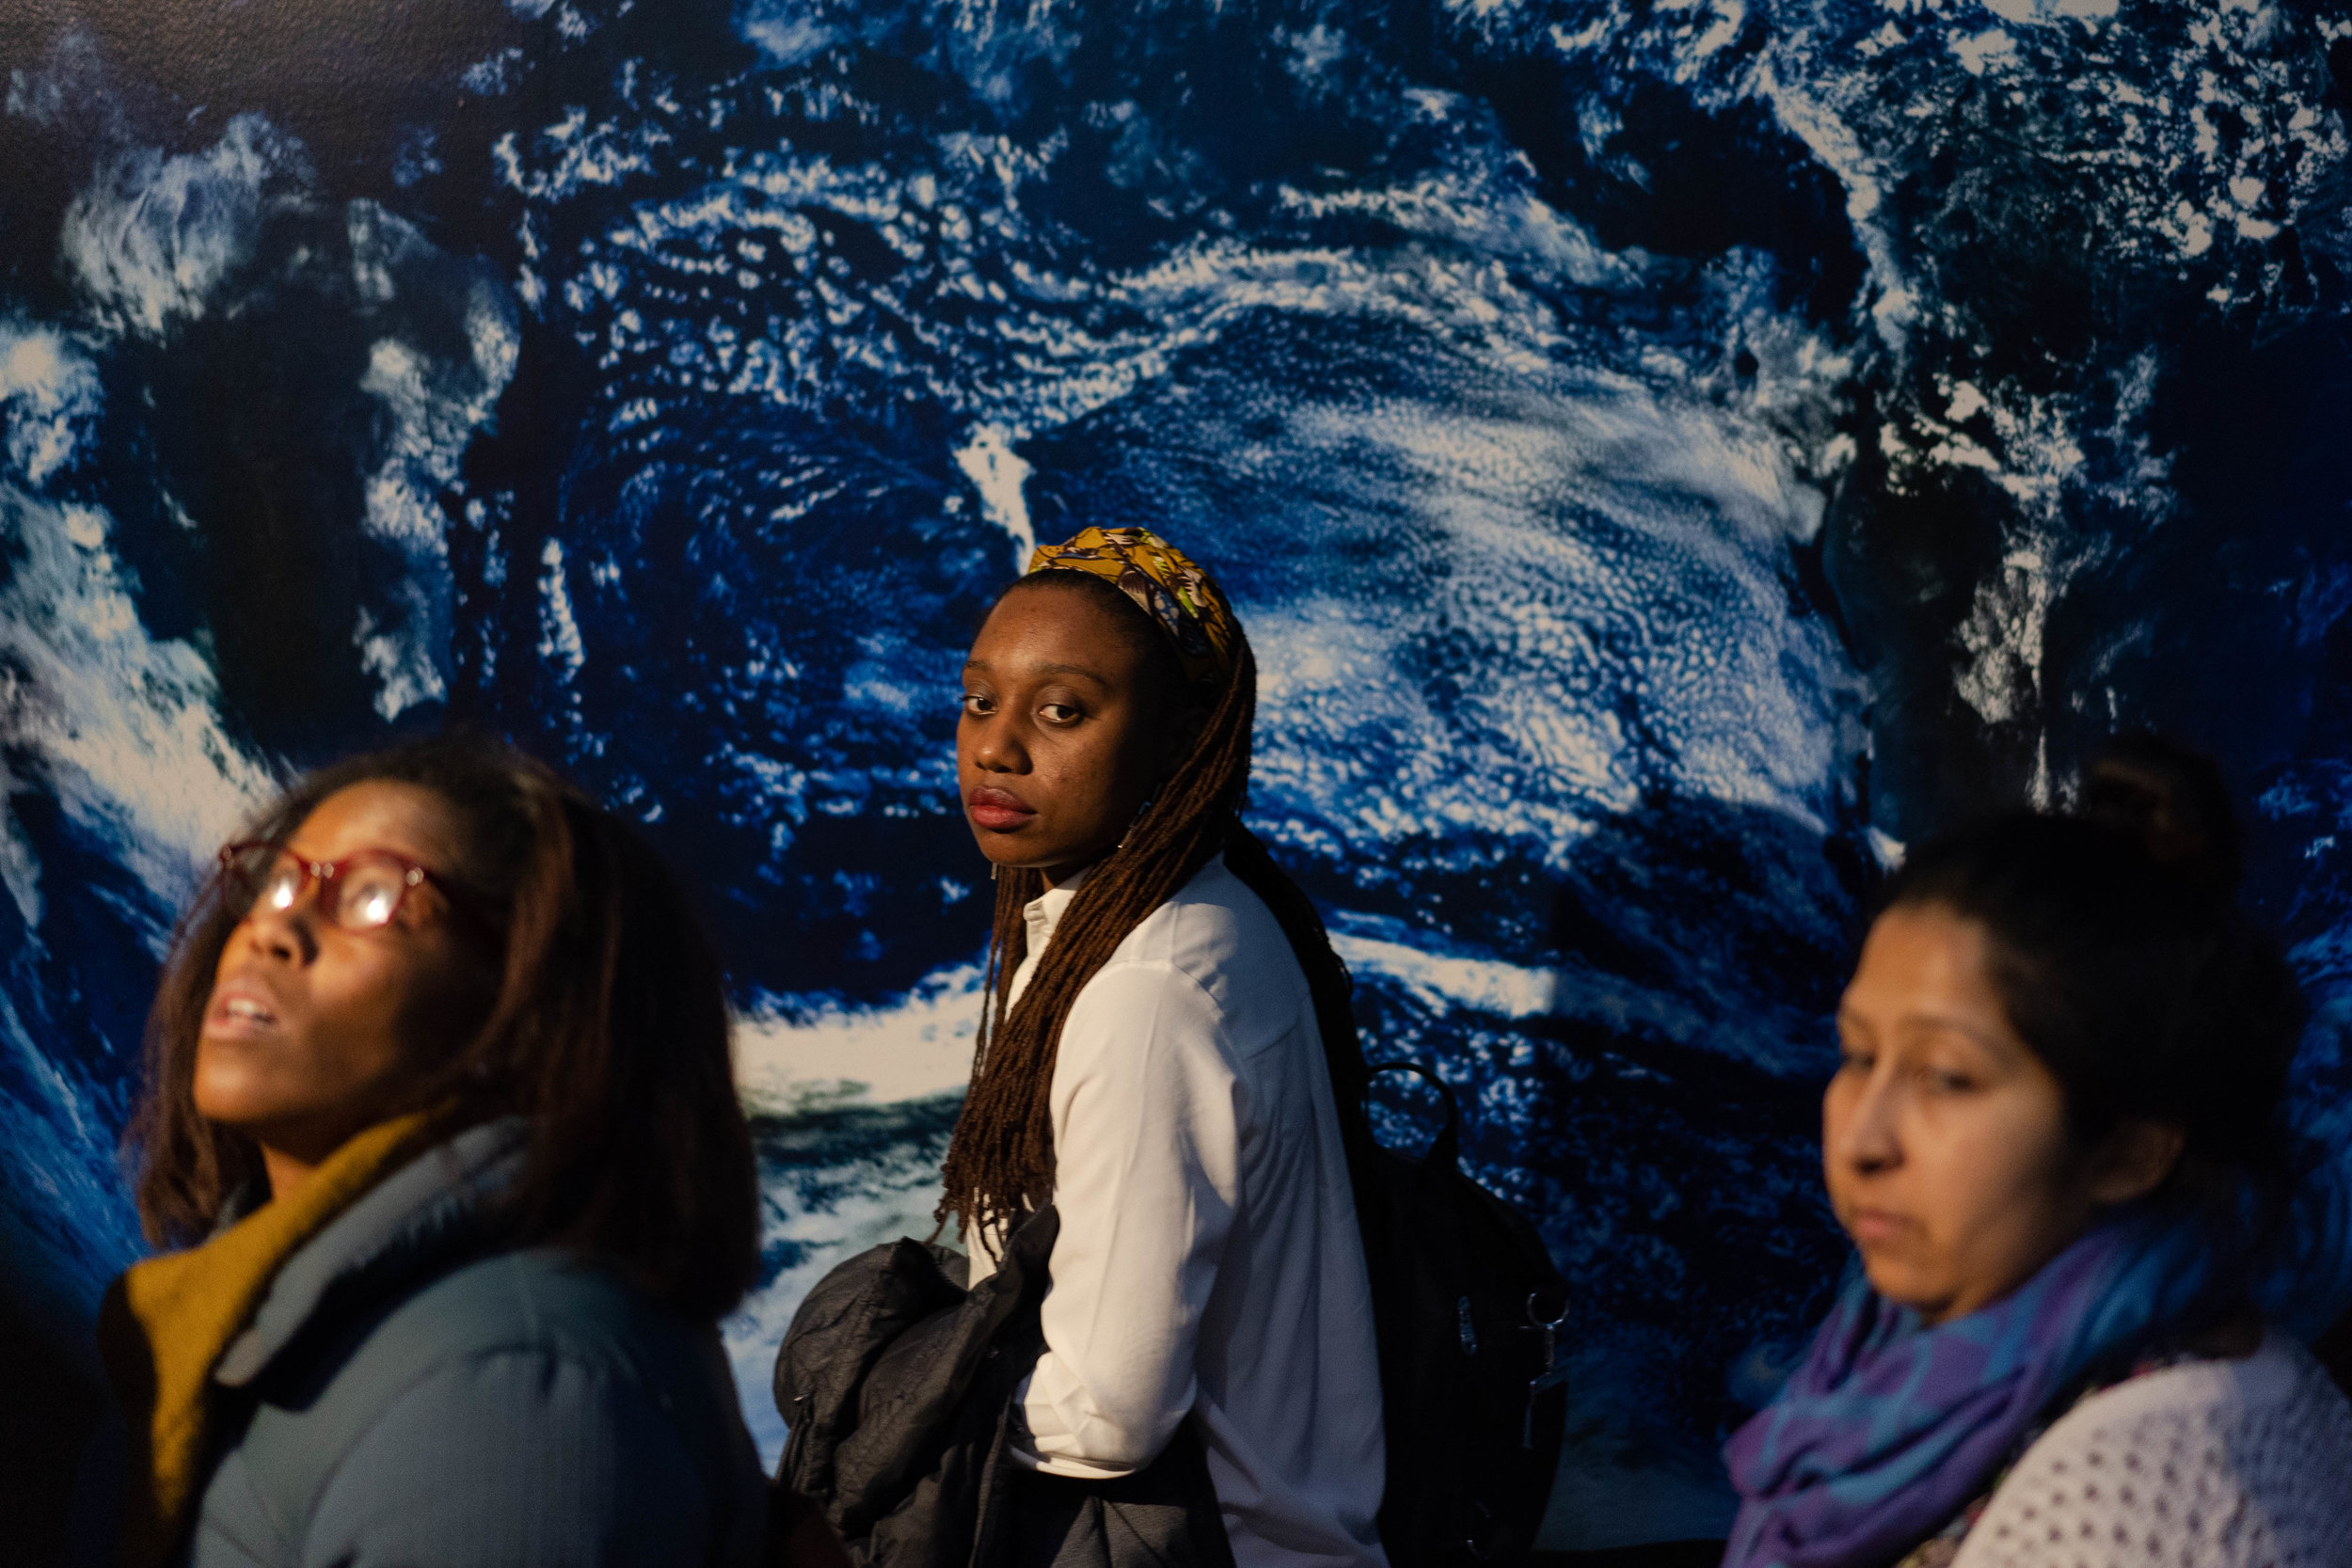  People browse the exhibits at Adler Planetarium.    